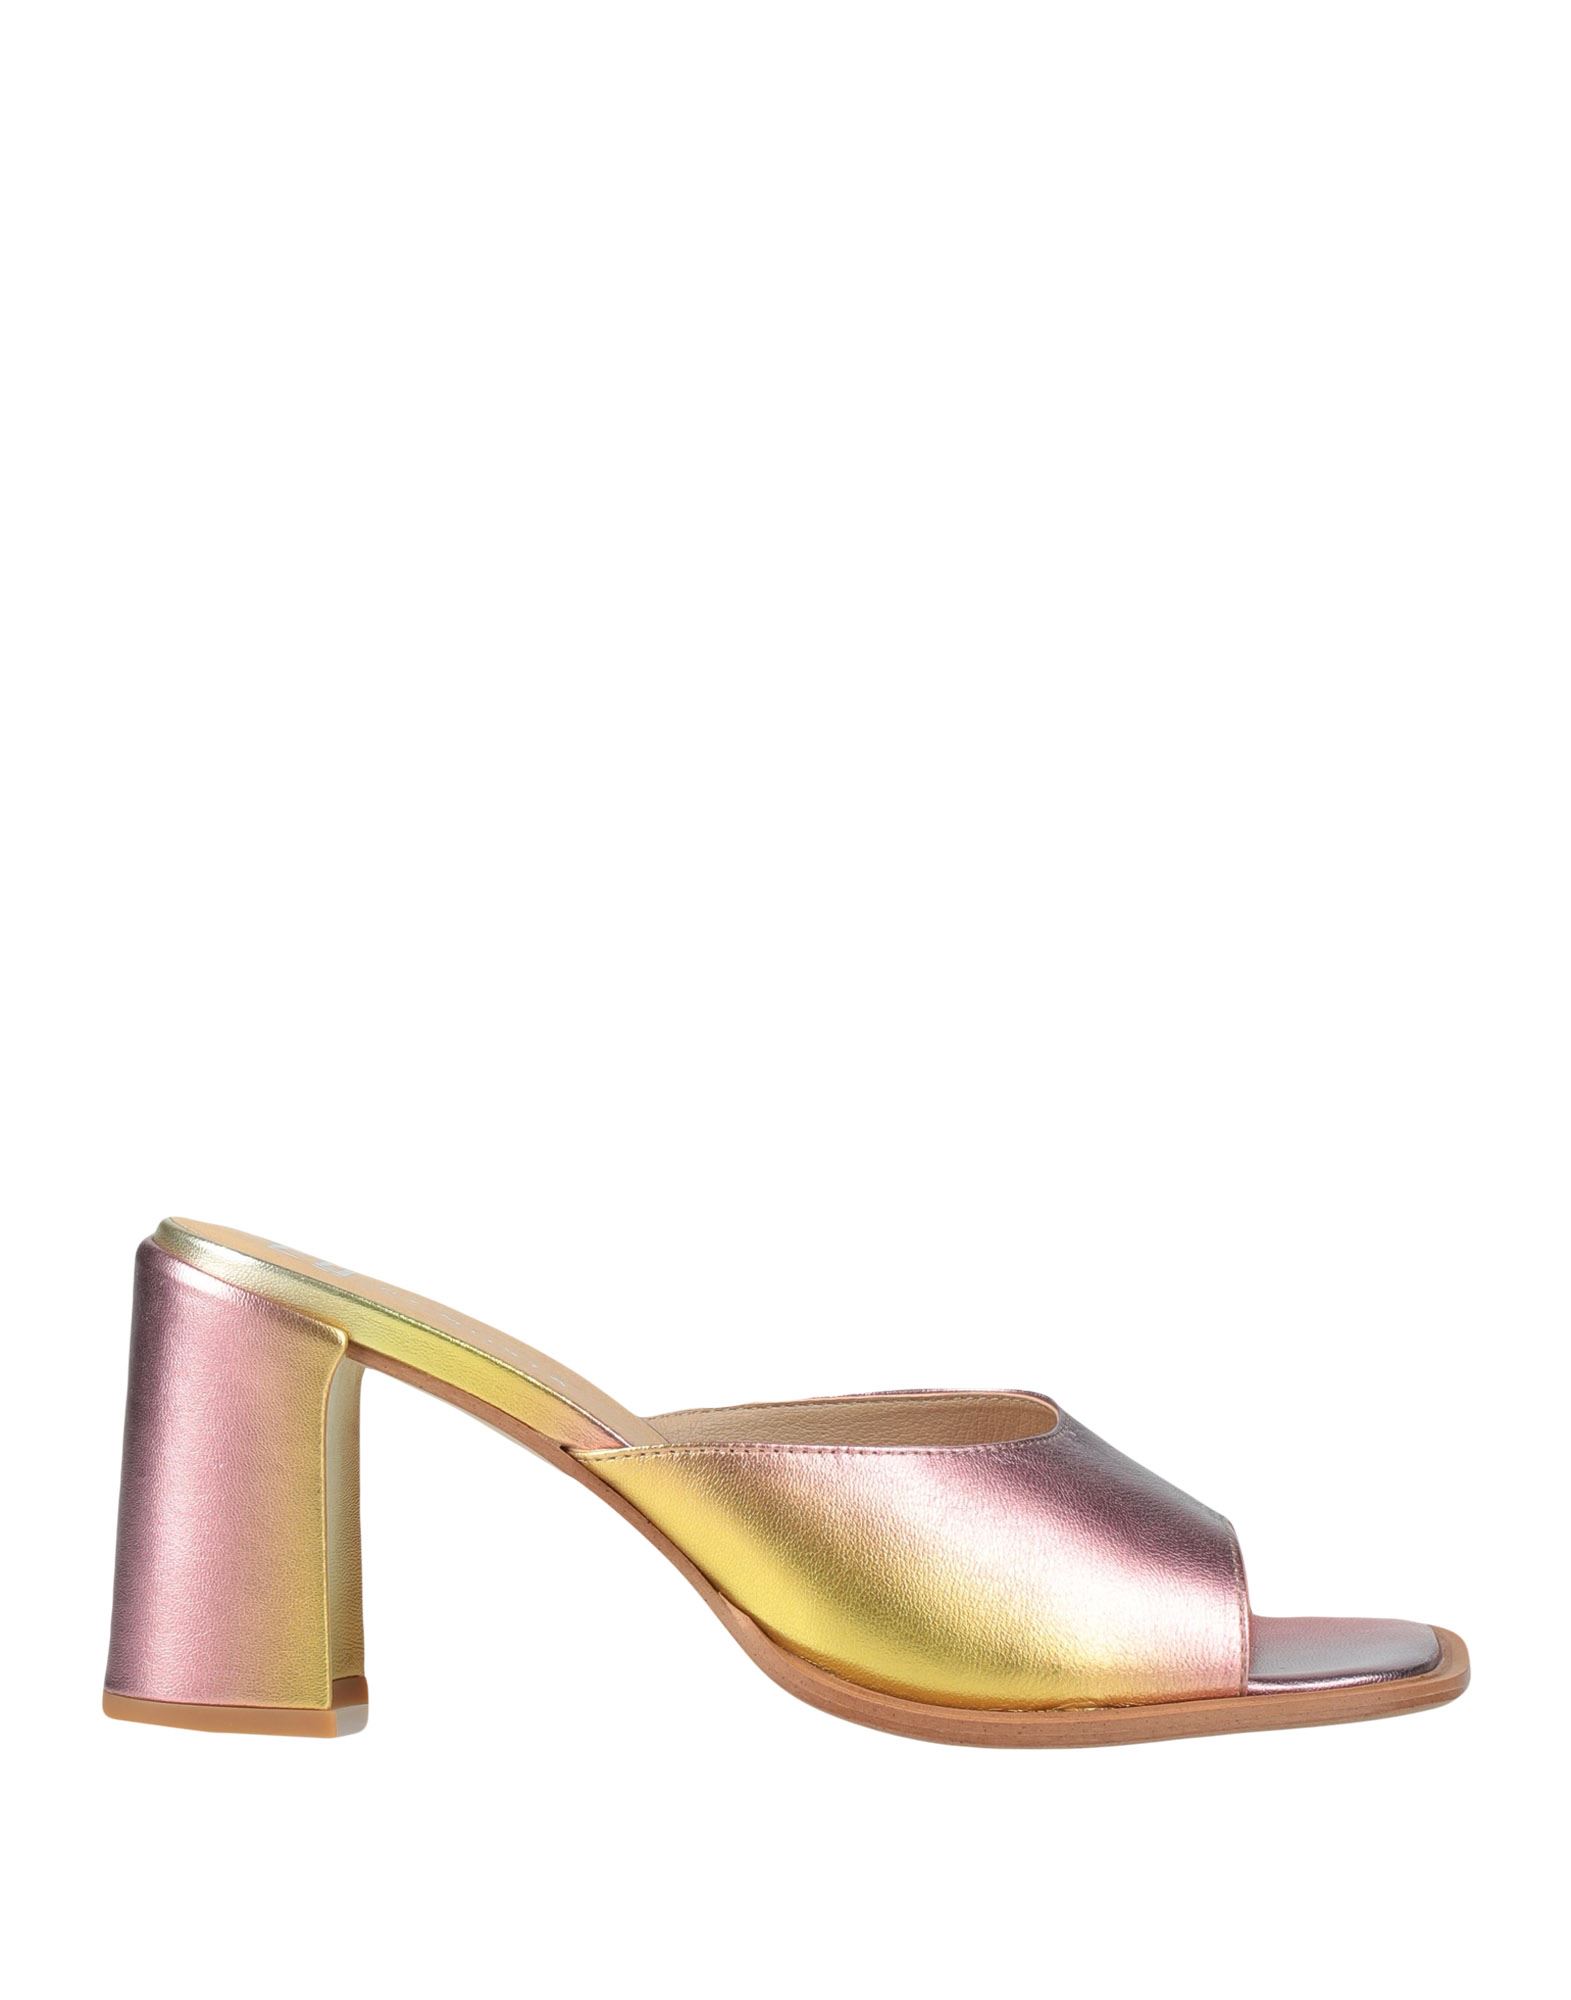 E8 By Miista Sandals In Rose Gold